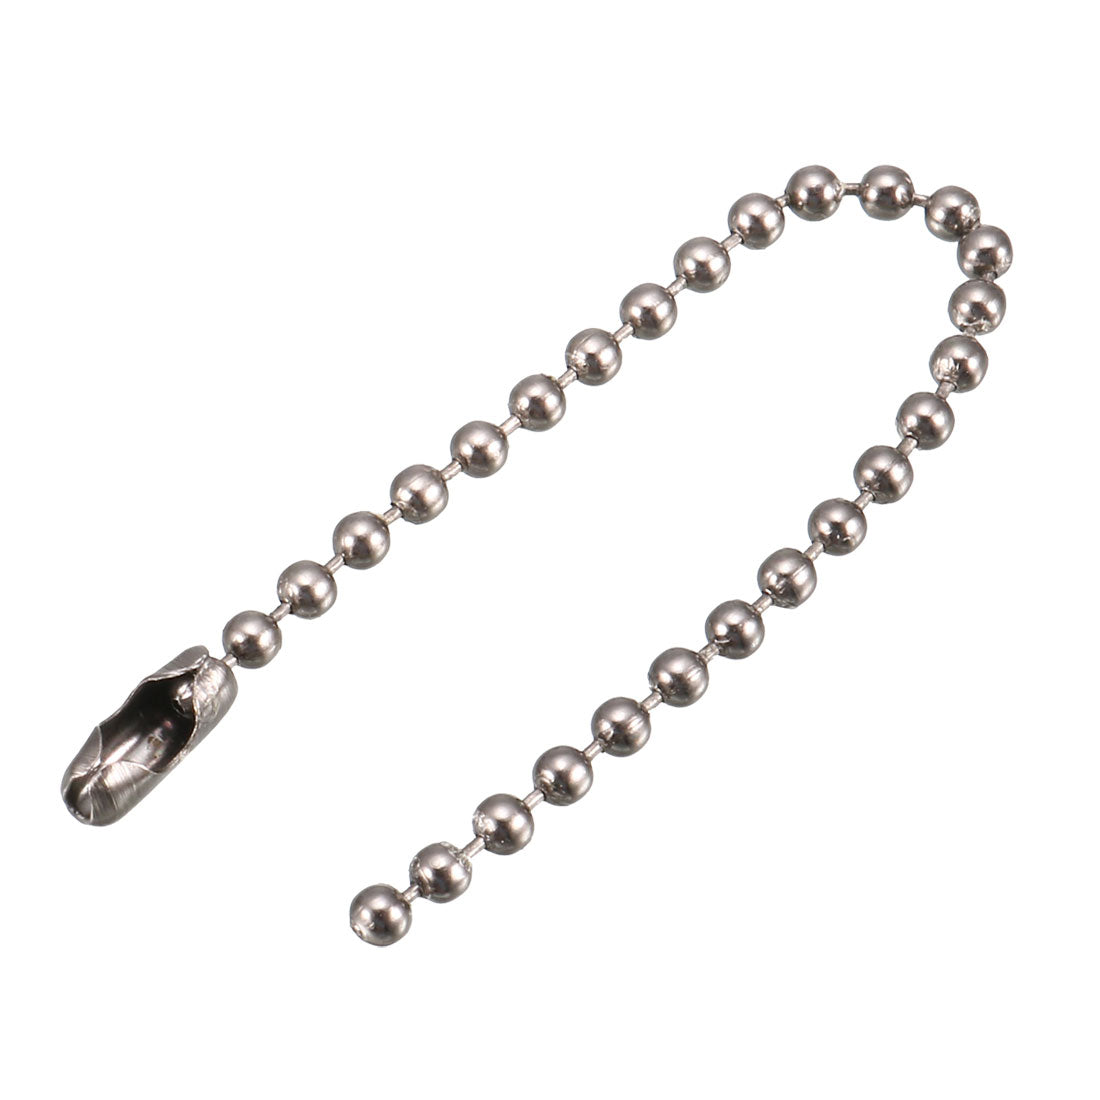 uxcell Uxcell 10Pcs Metal Bead Clasp Ball Connector Chain Keychain 2.4mm Dia 10cm Length